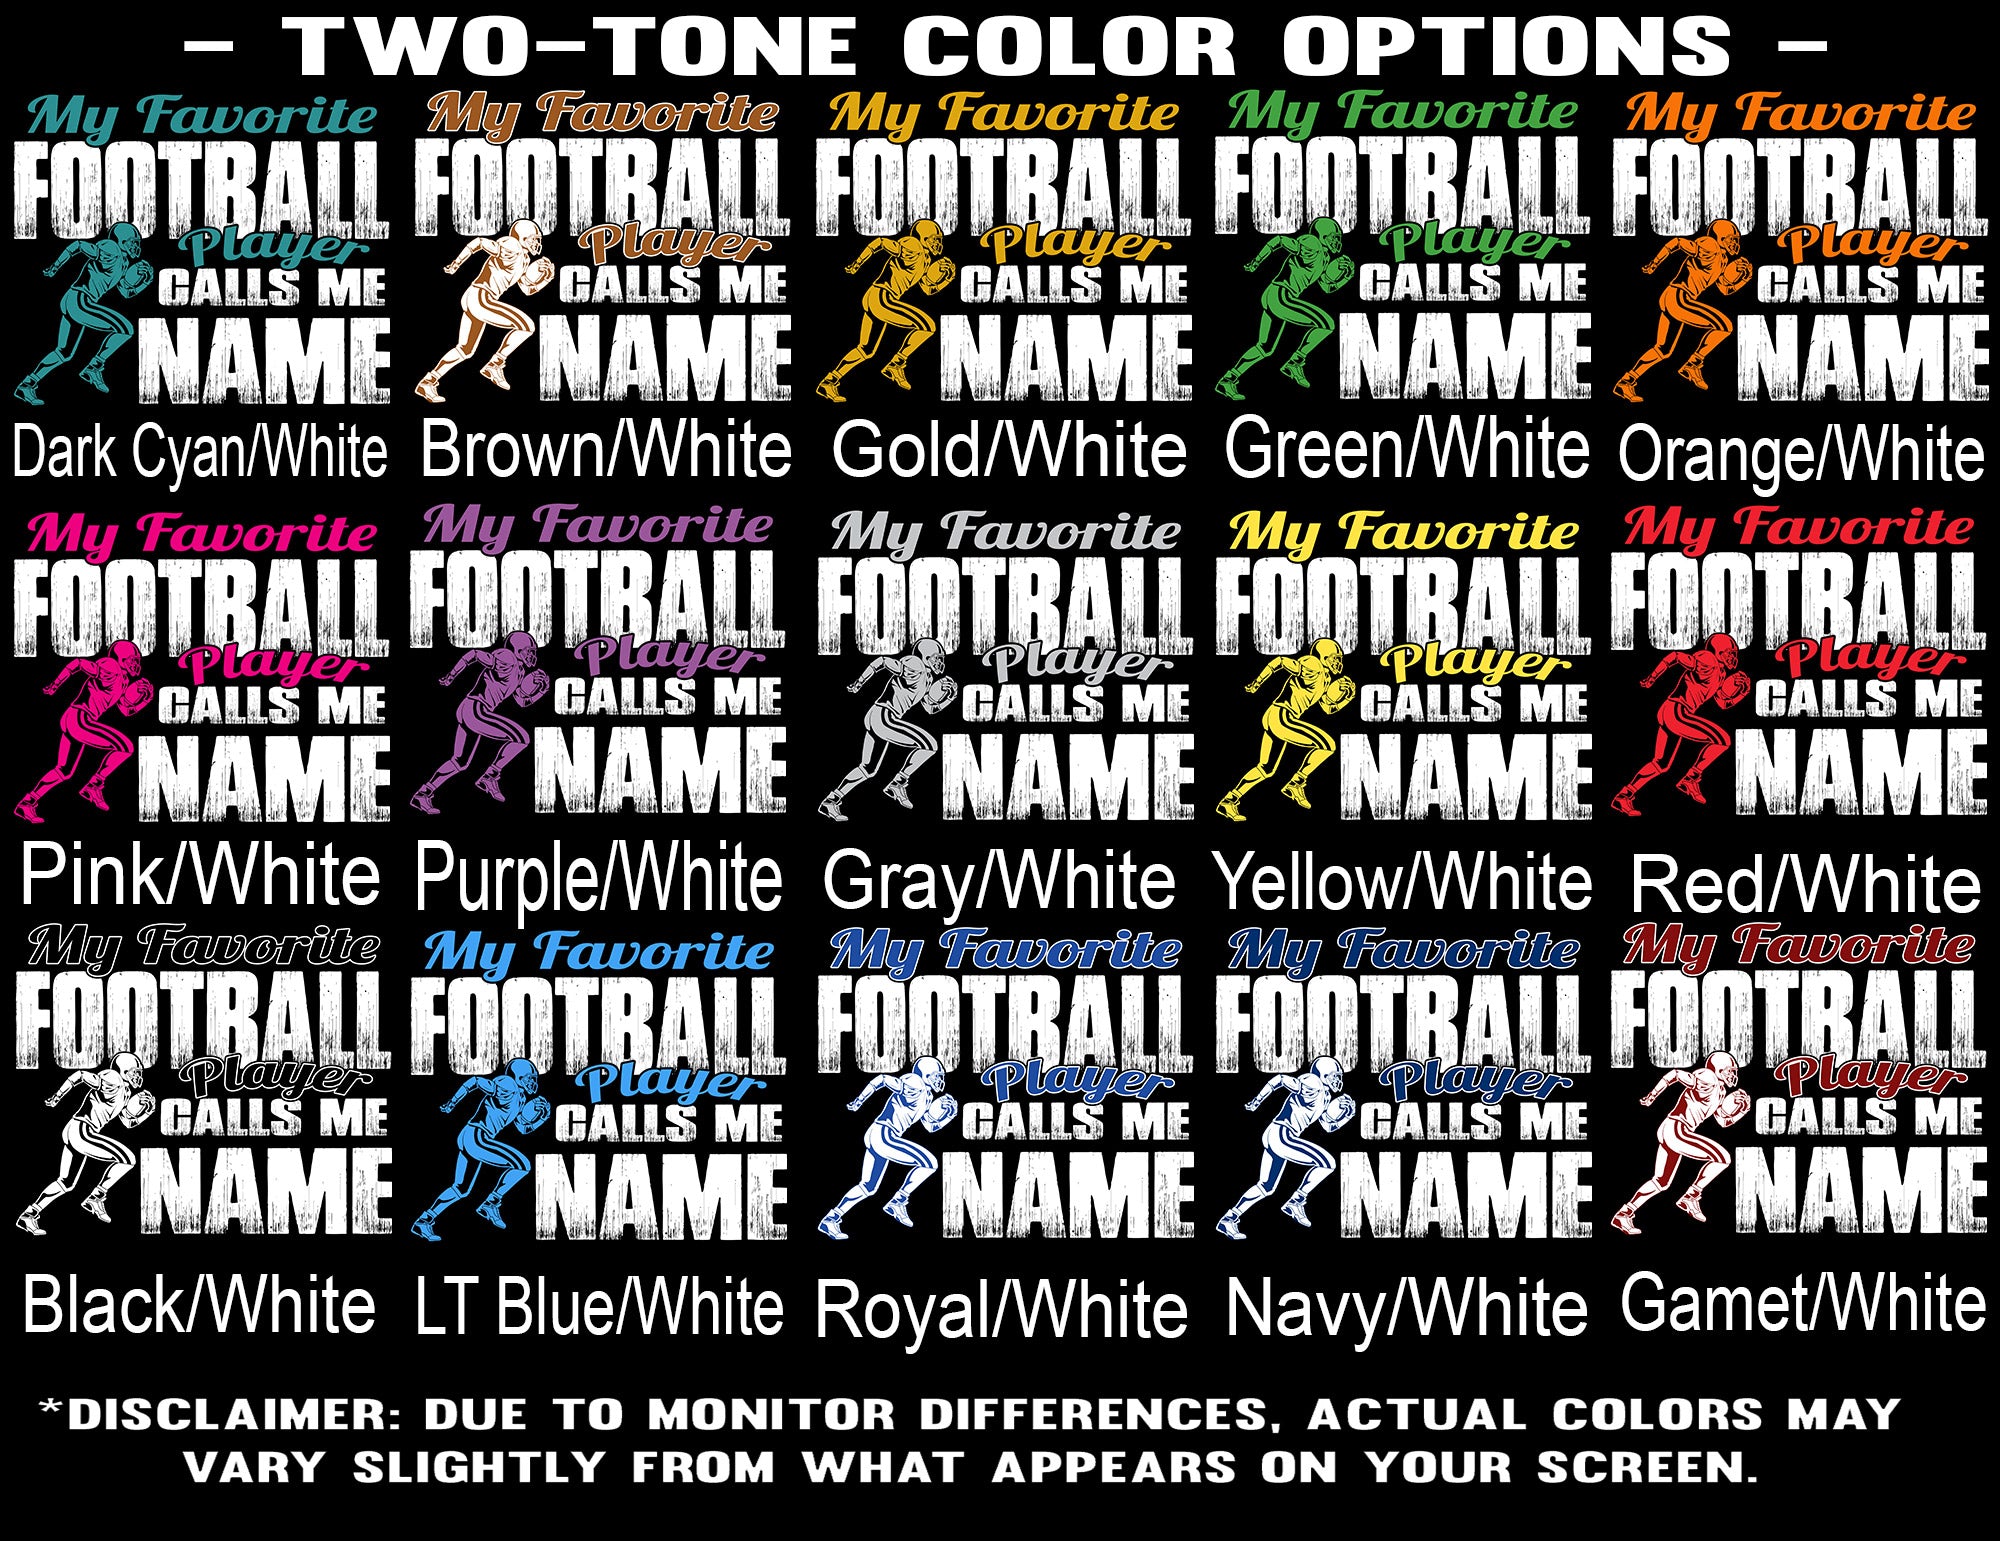 Desigdesign a full-color football player according to the client's request